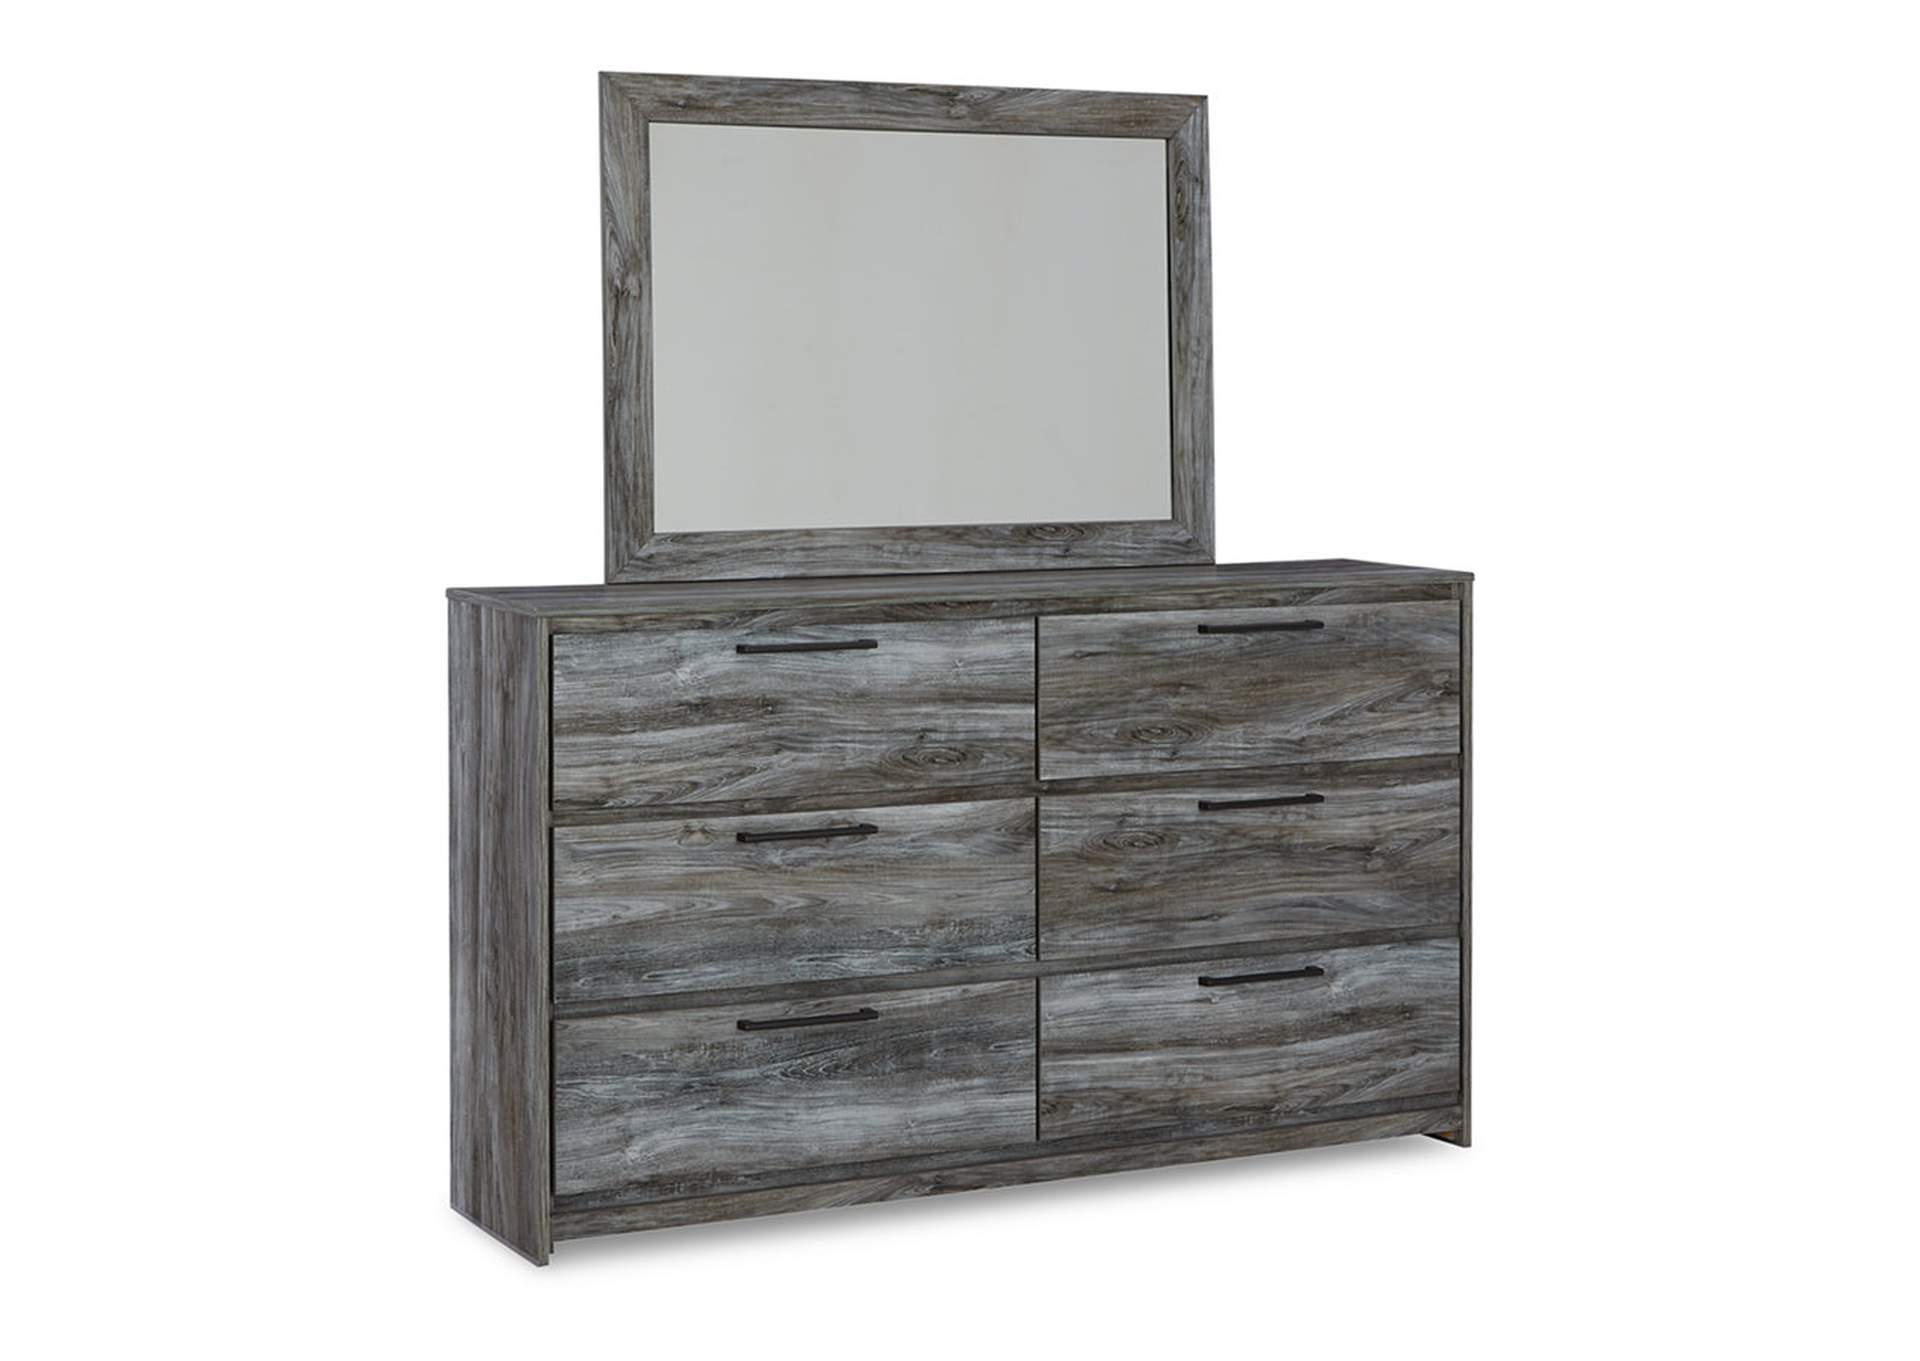 Baystorm King Panel Bed with Mirrored Dresser, Chest and 2 Nightstands,Signature Design By Ashley